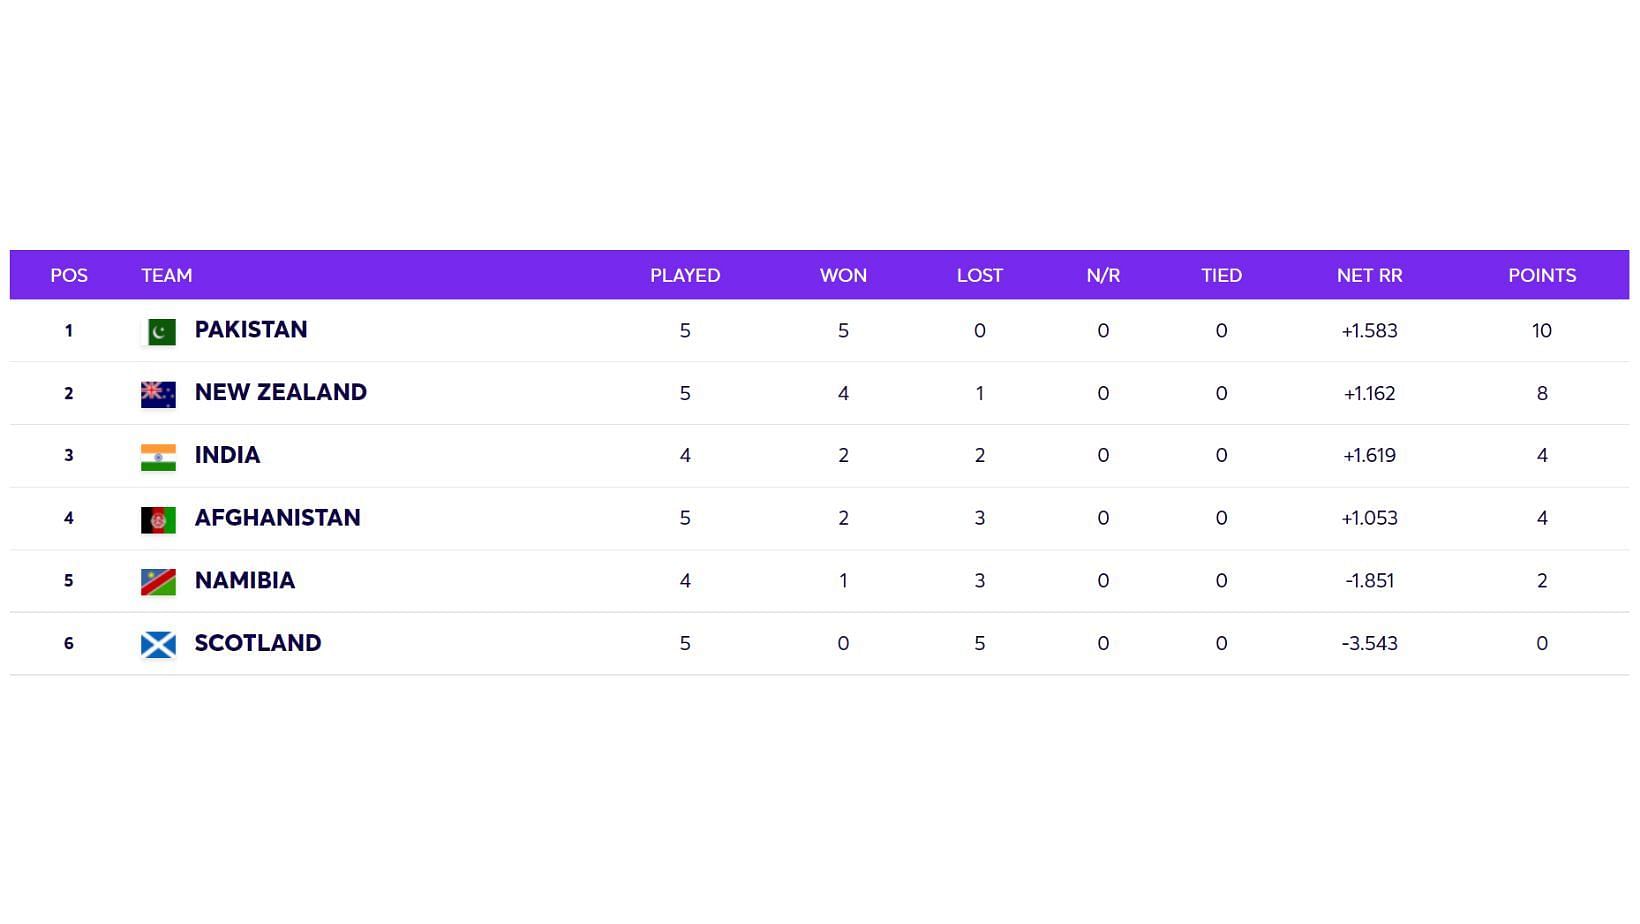 T20 World Cup 2021 Super 12 Group 2 points table updated after Saturday.